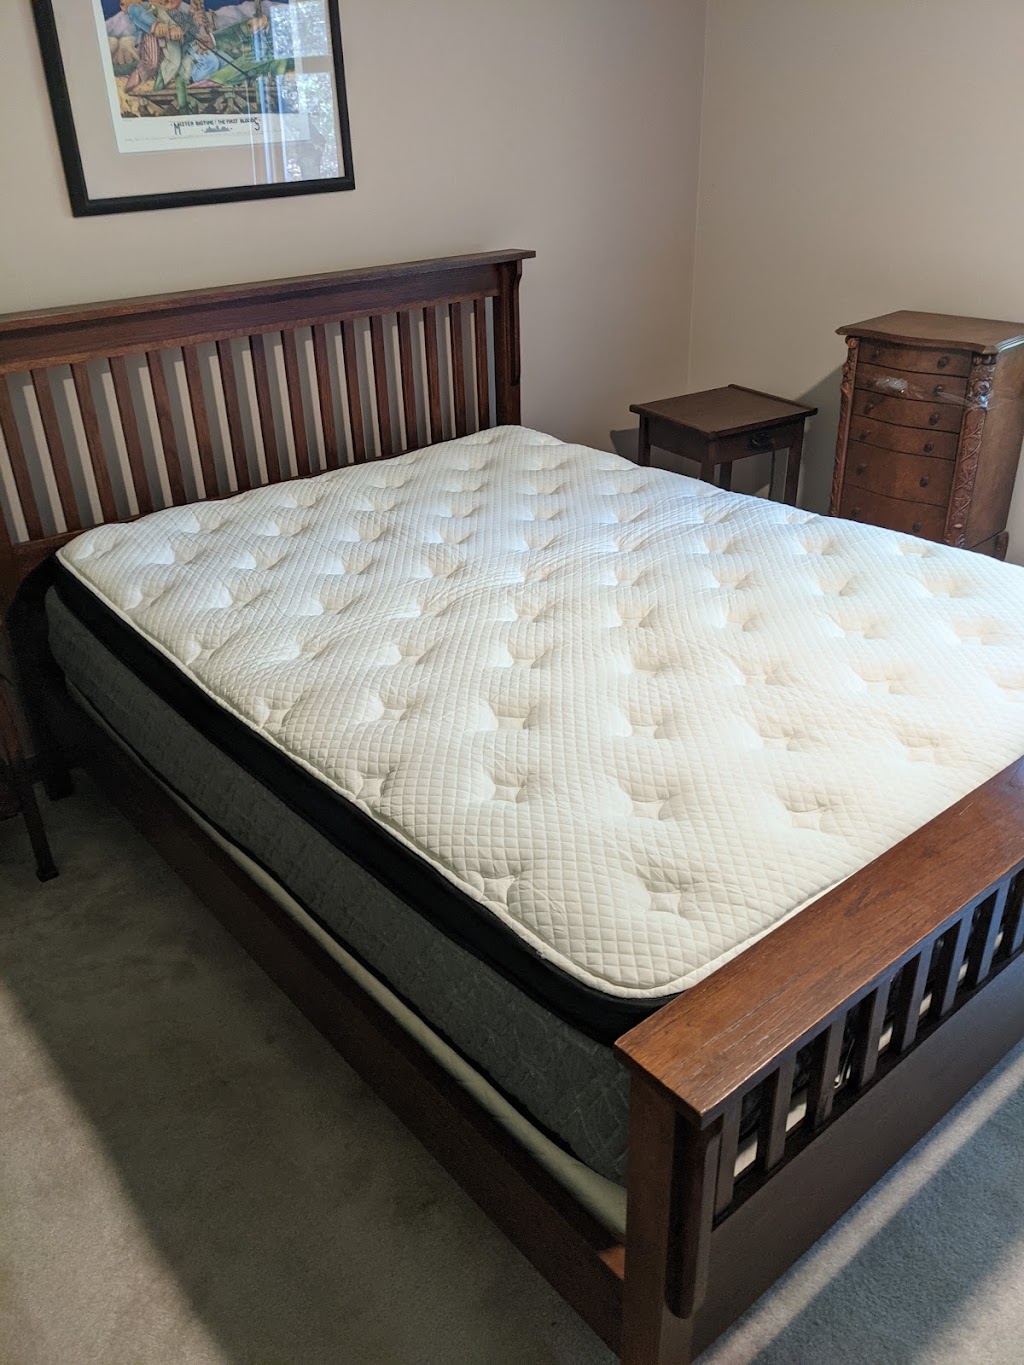 Mattress By Appointment | 410 Justice St, Fremont, OH 43420 | Phone: (419) 407-6963